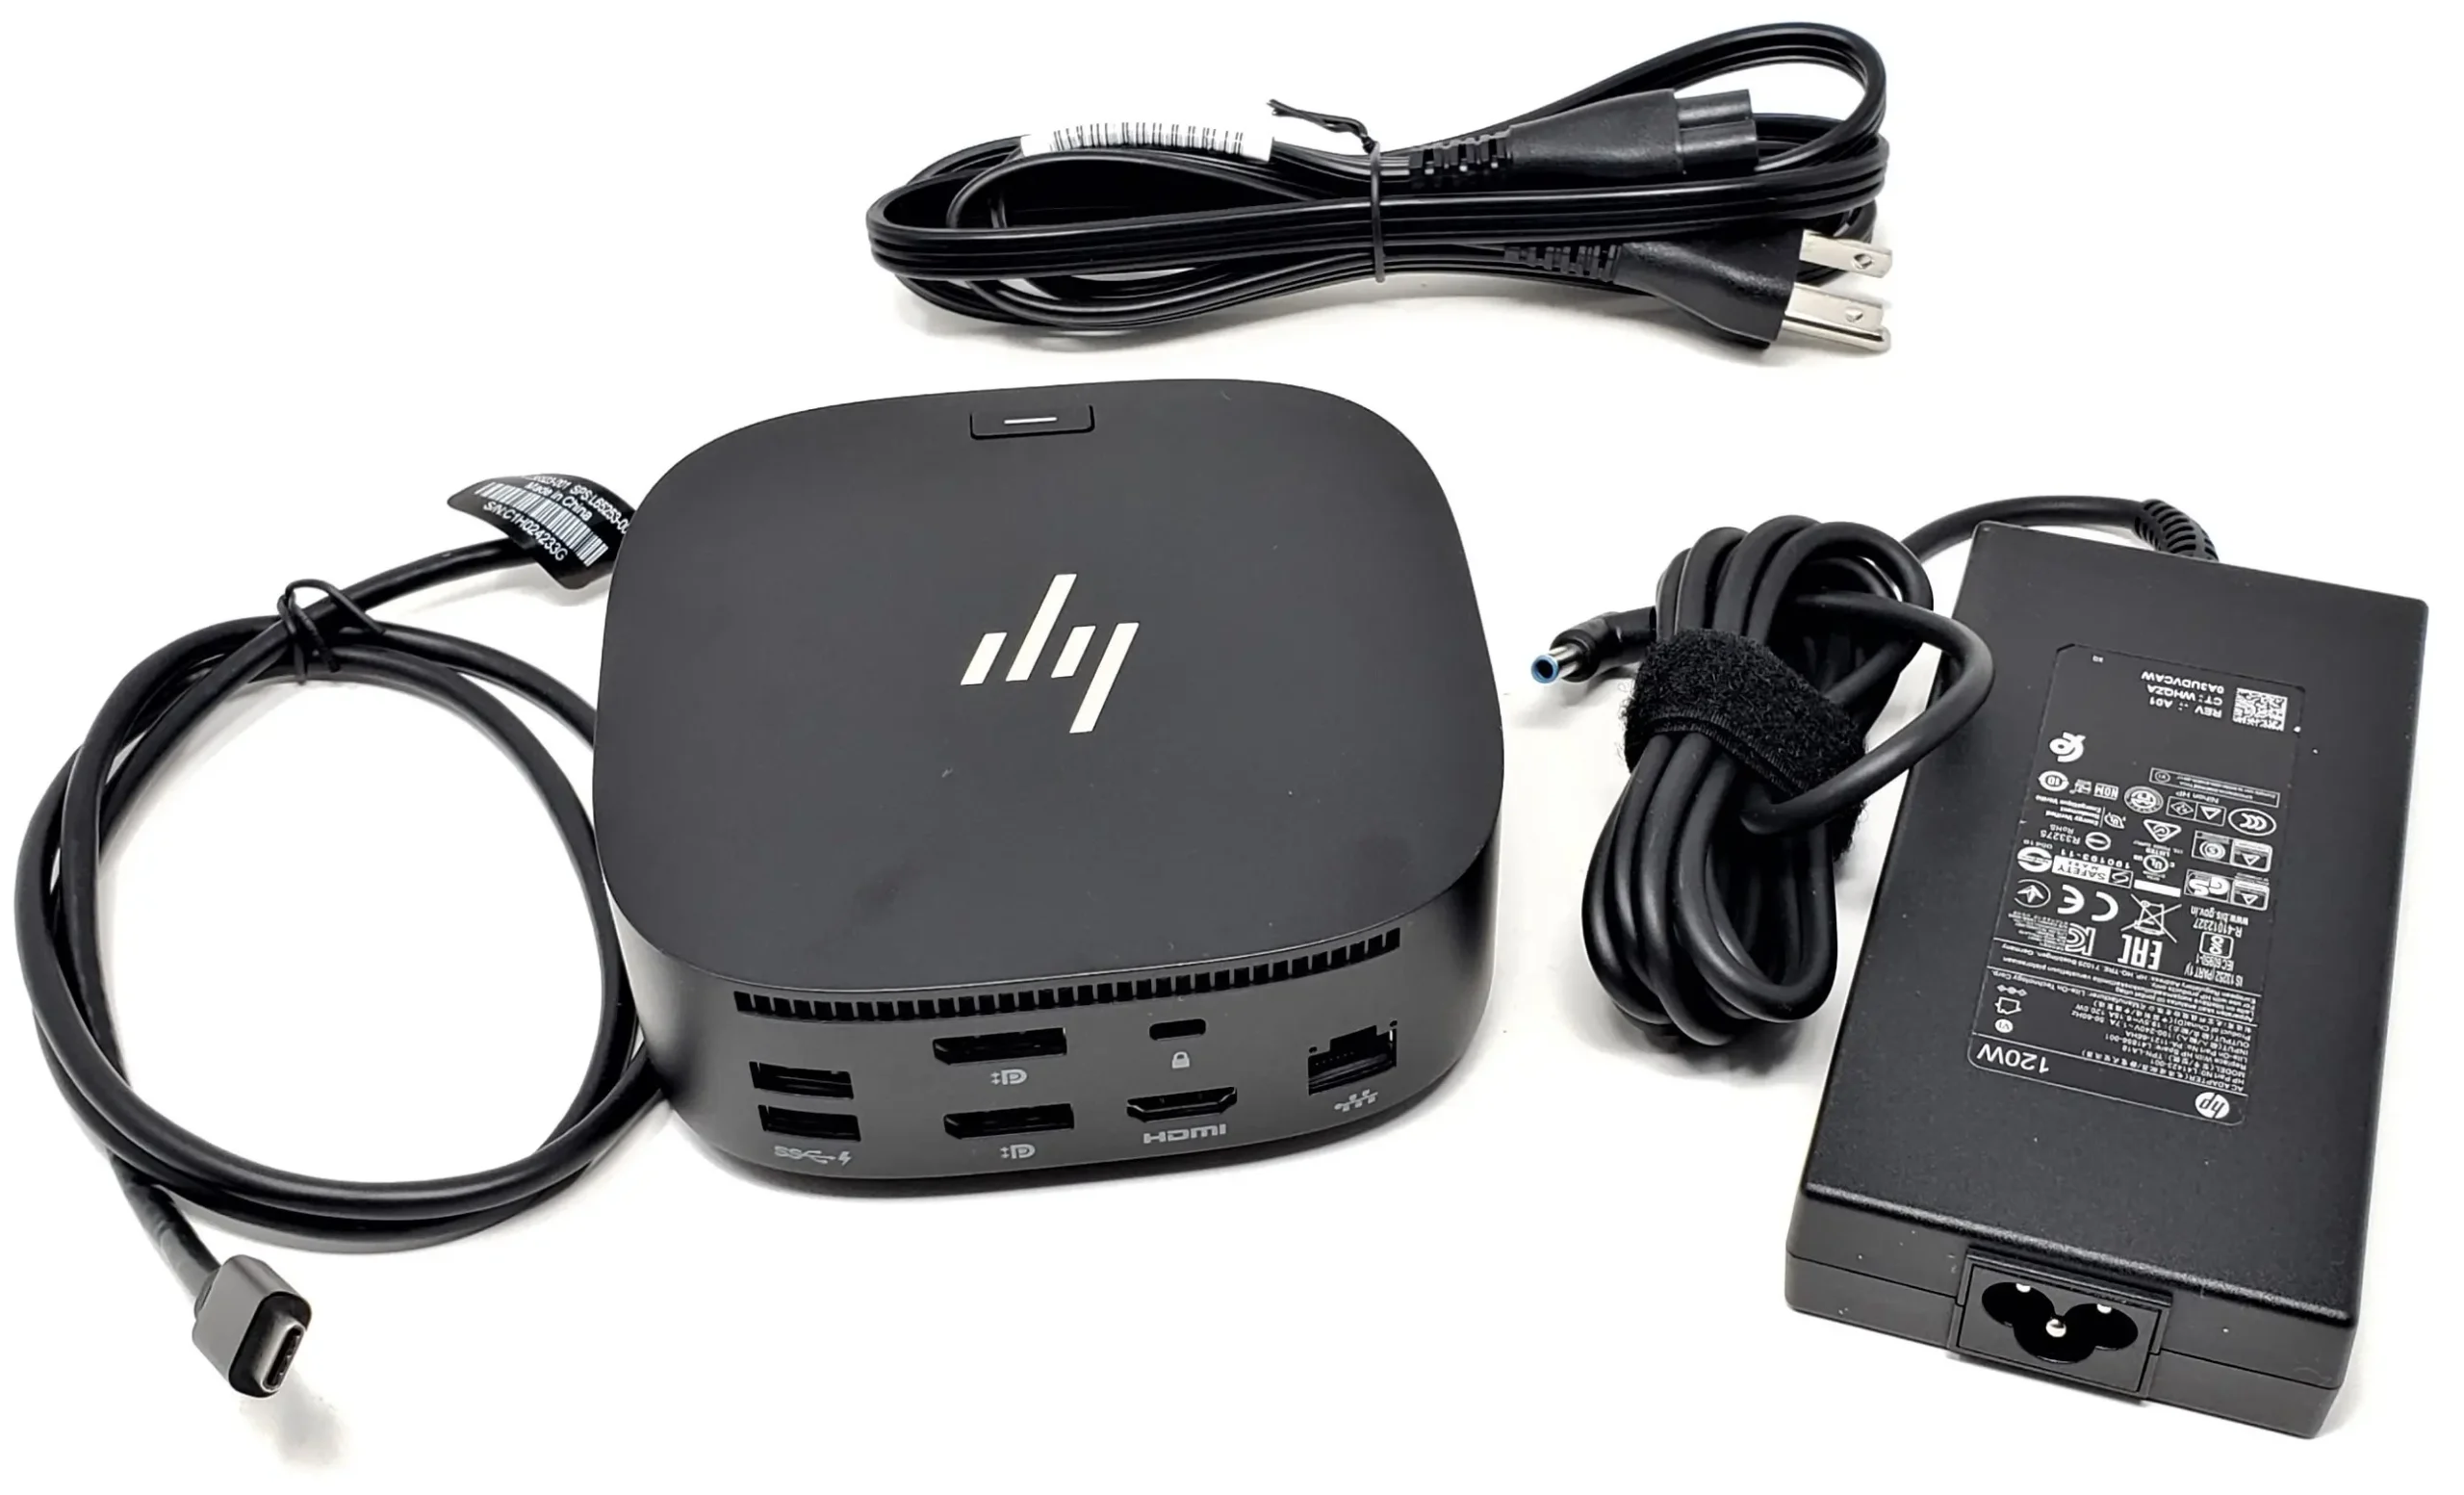 hewlett packard docking station - Can I use a docking station with a HP laptop